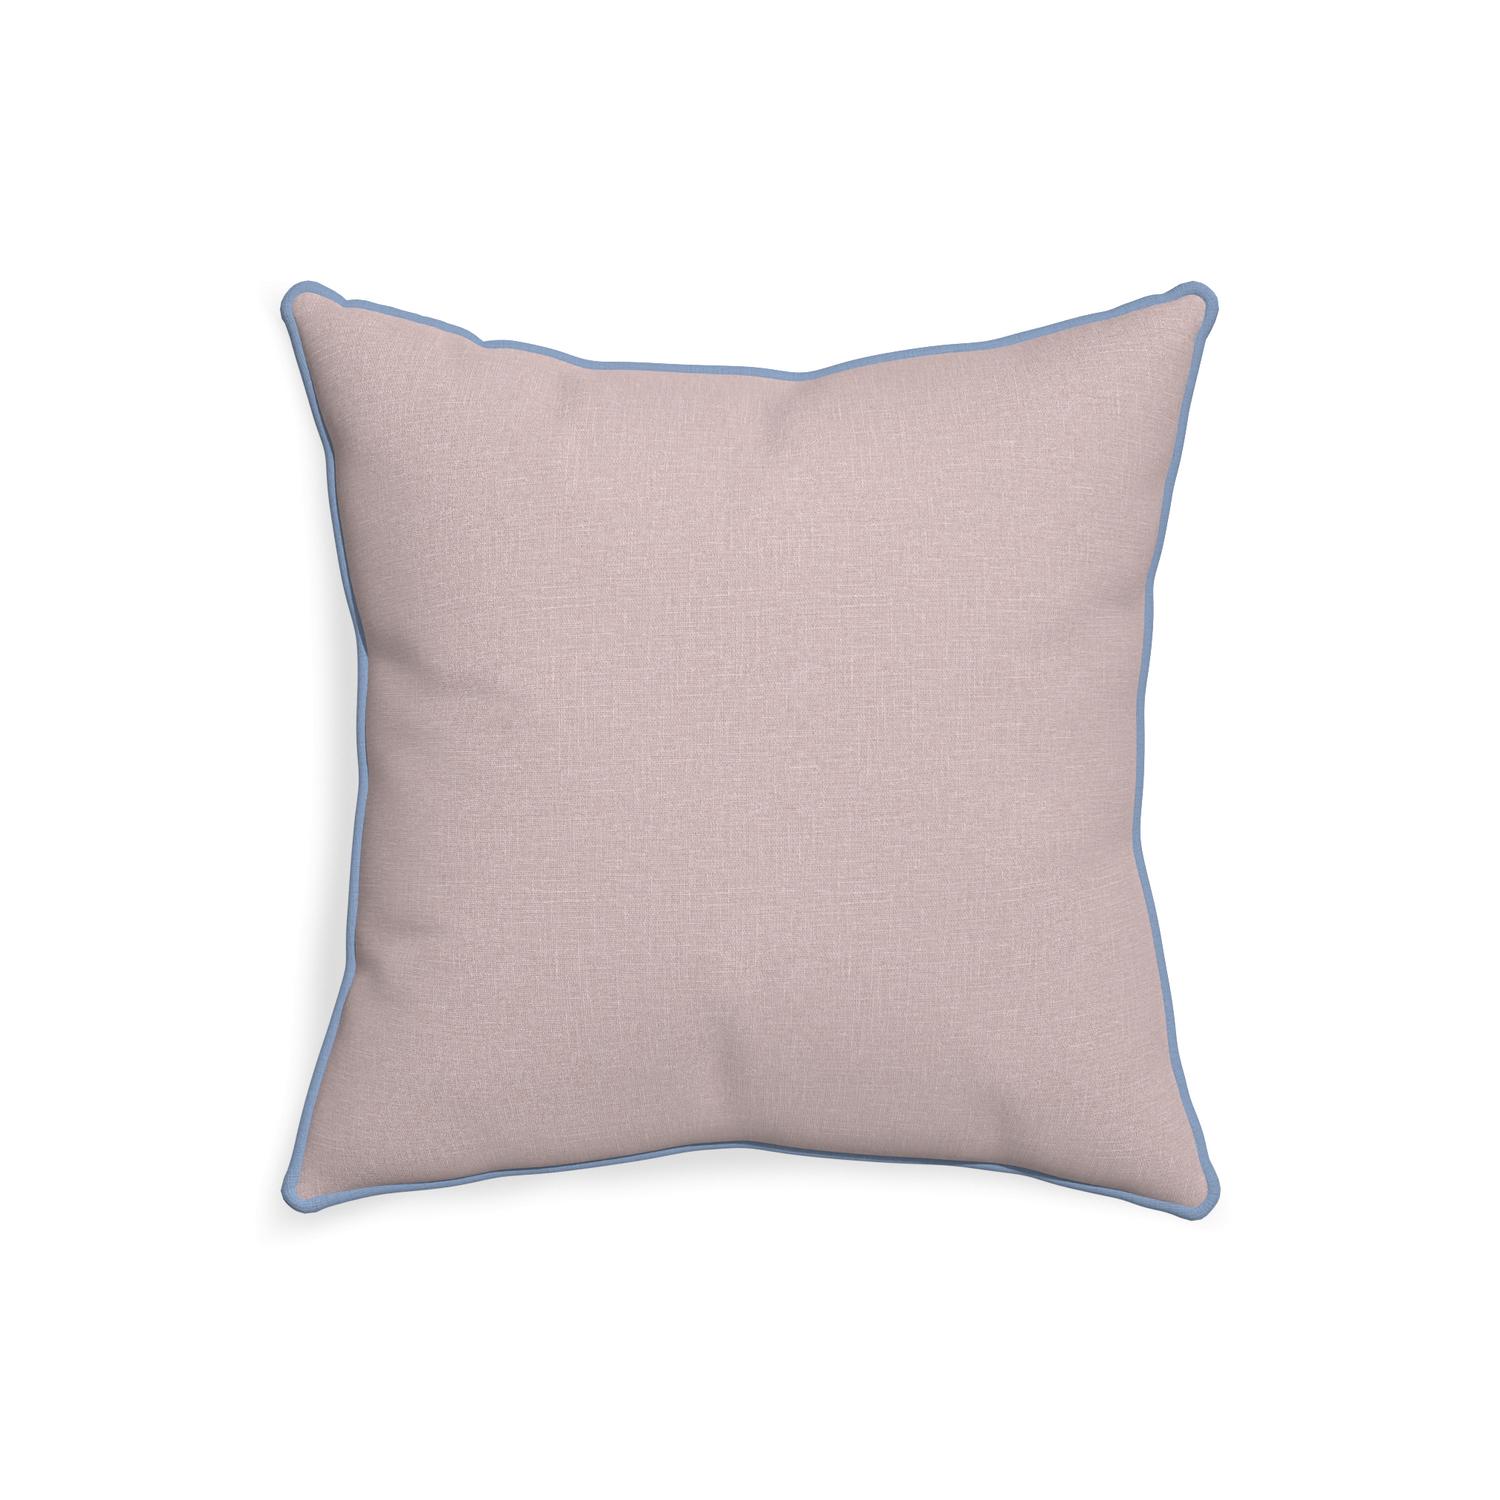 20-square orchid custom mauve pinkpillow with sky piping on white background